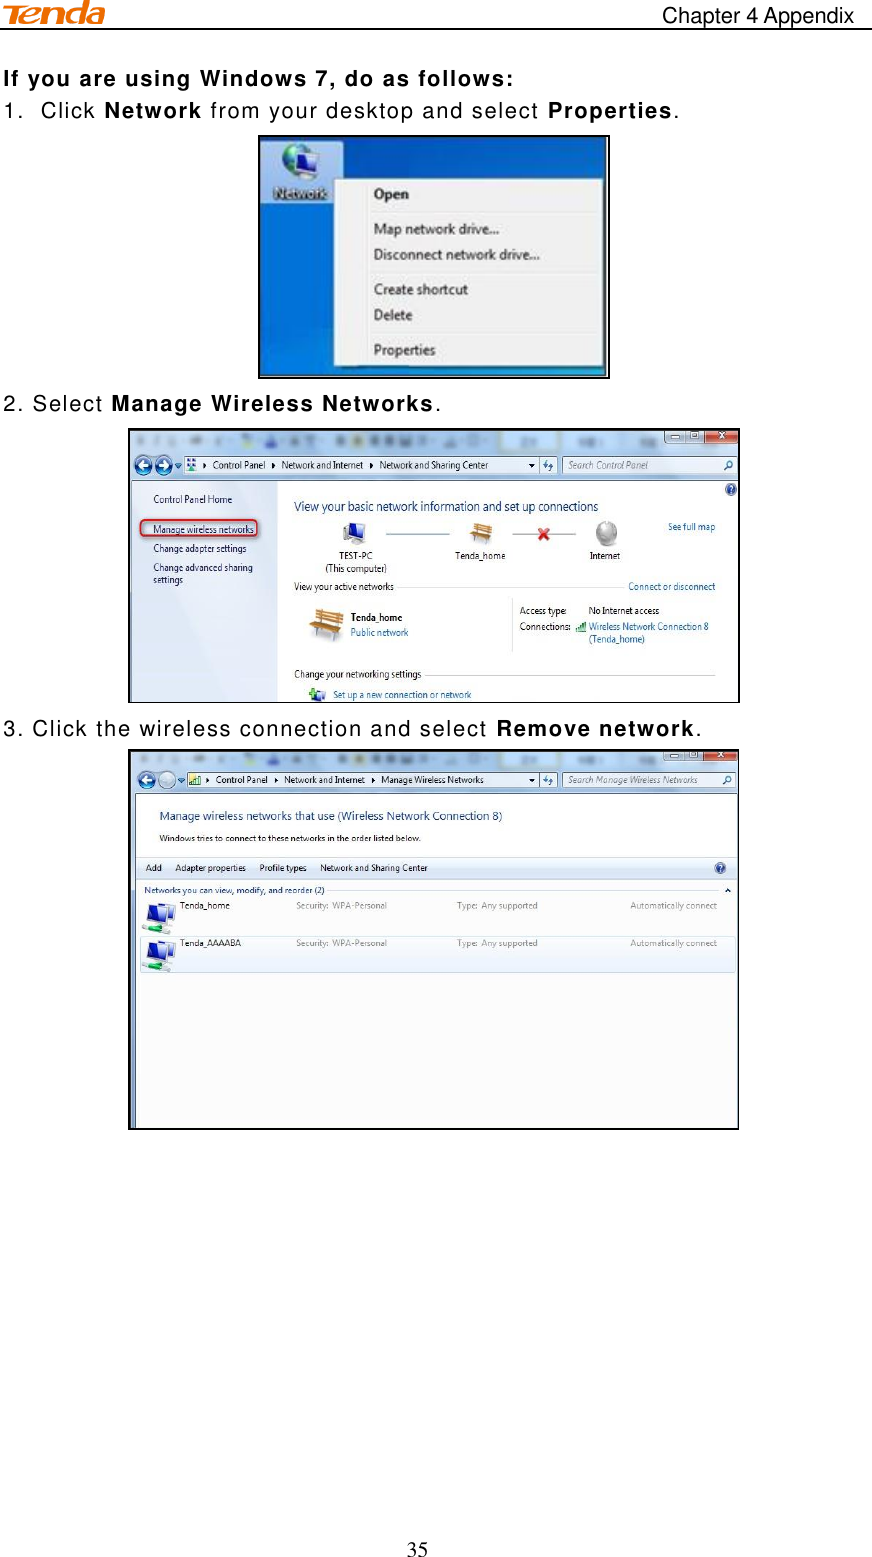                                                    Chapter 4 Appendix 35 If you are using Windows 7, do as follows: 1.  Click Network from your desktop and select Properties.  2. Select Manage Wireless Networks.  3. Click the wireless connection and select Remove network.      